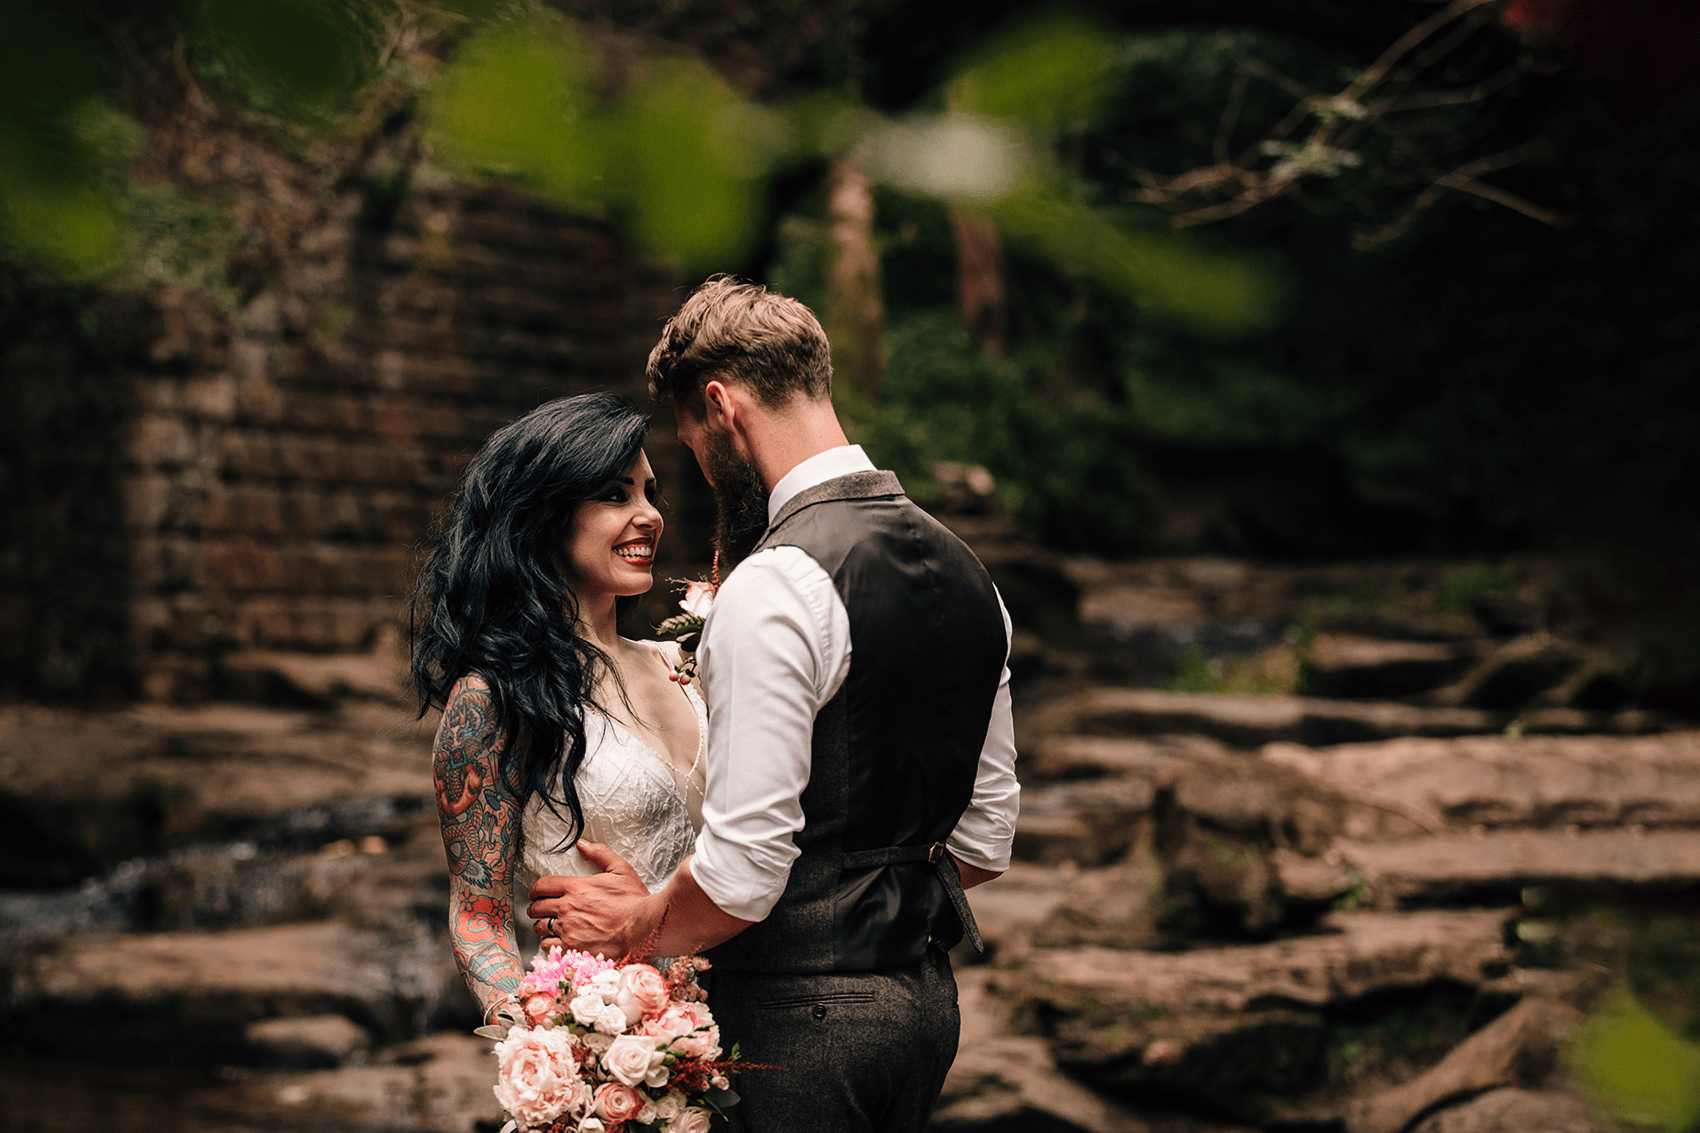 Micro wedding photography pricing packages